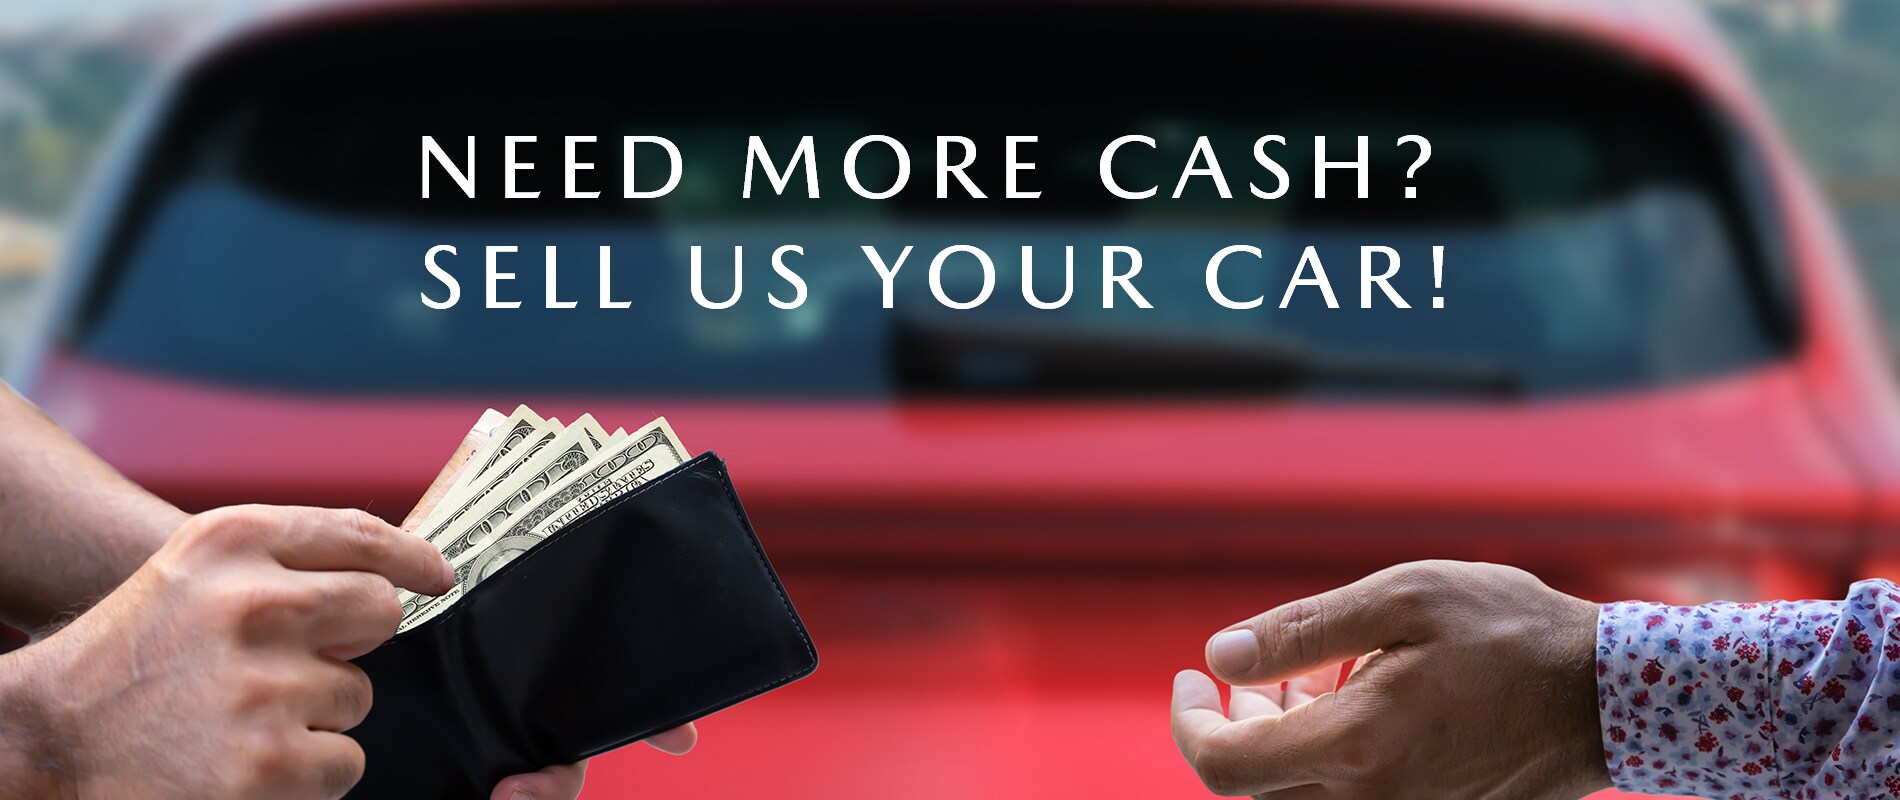 Sell your car to Mazda for Cash